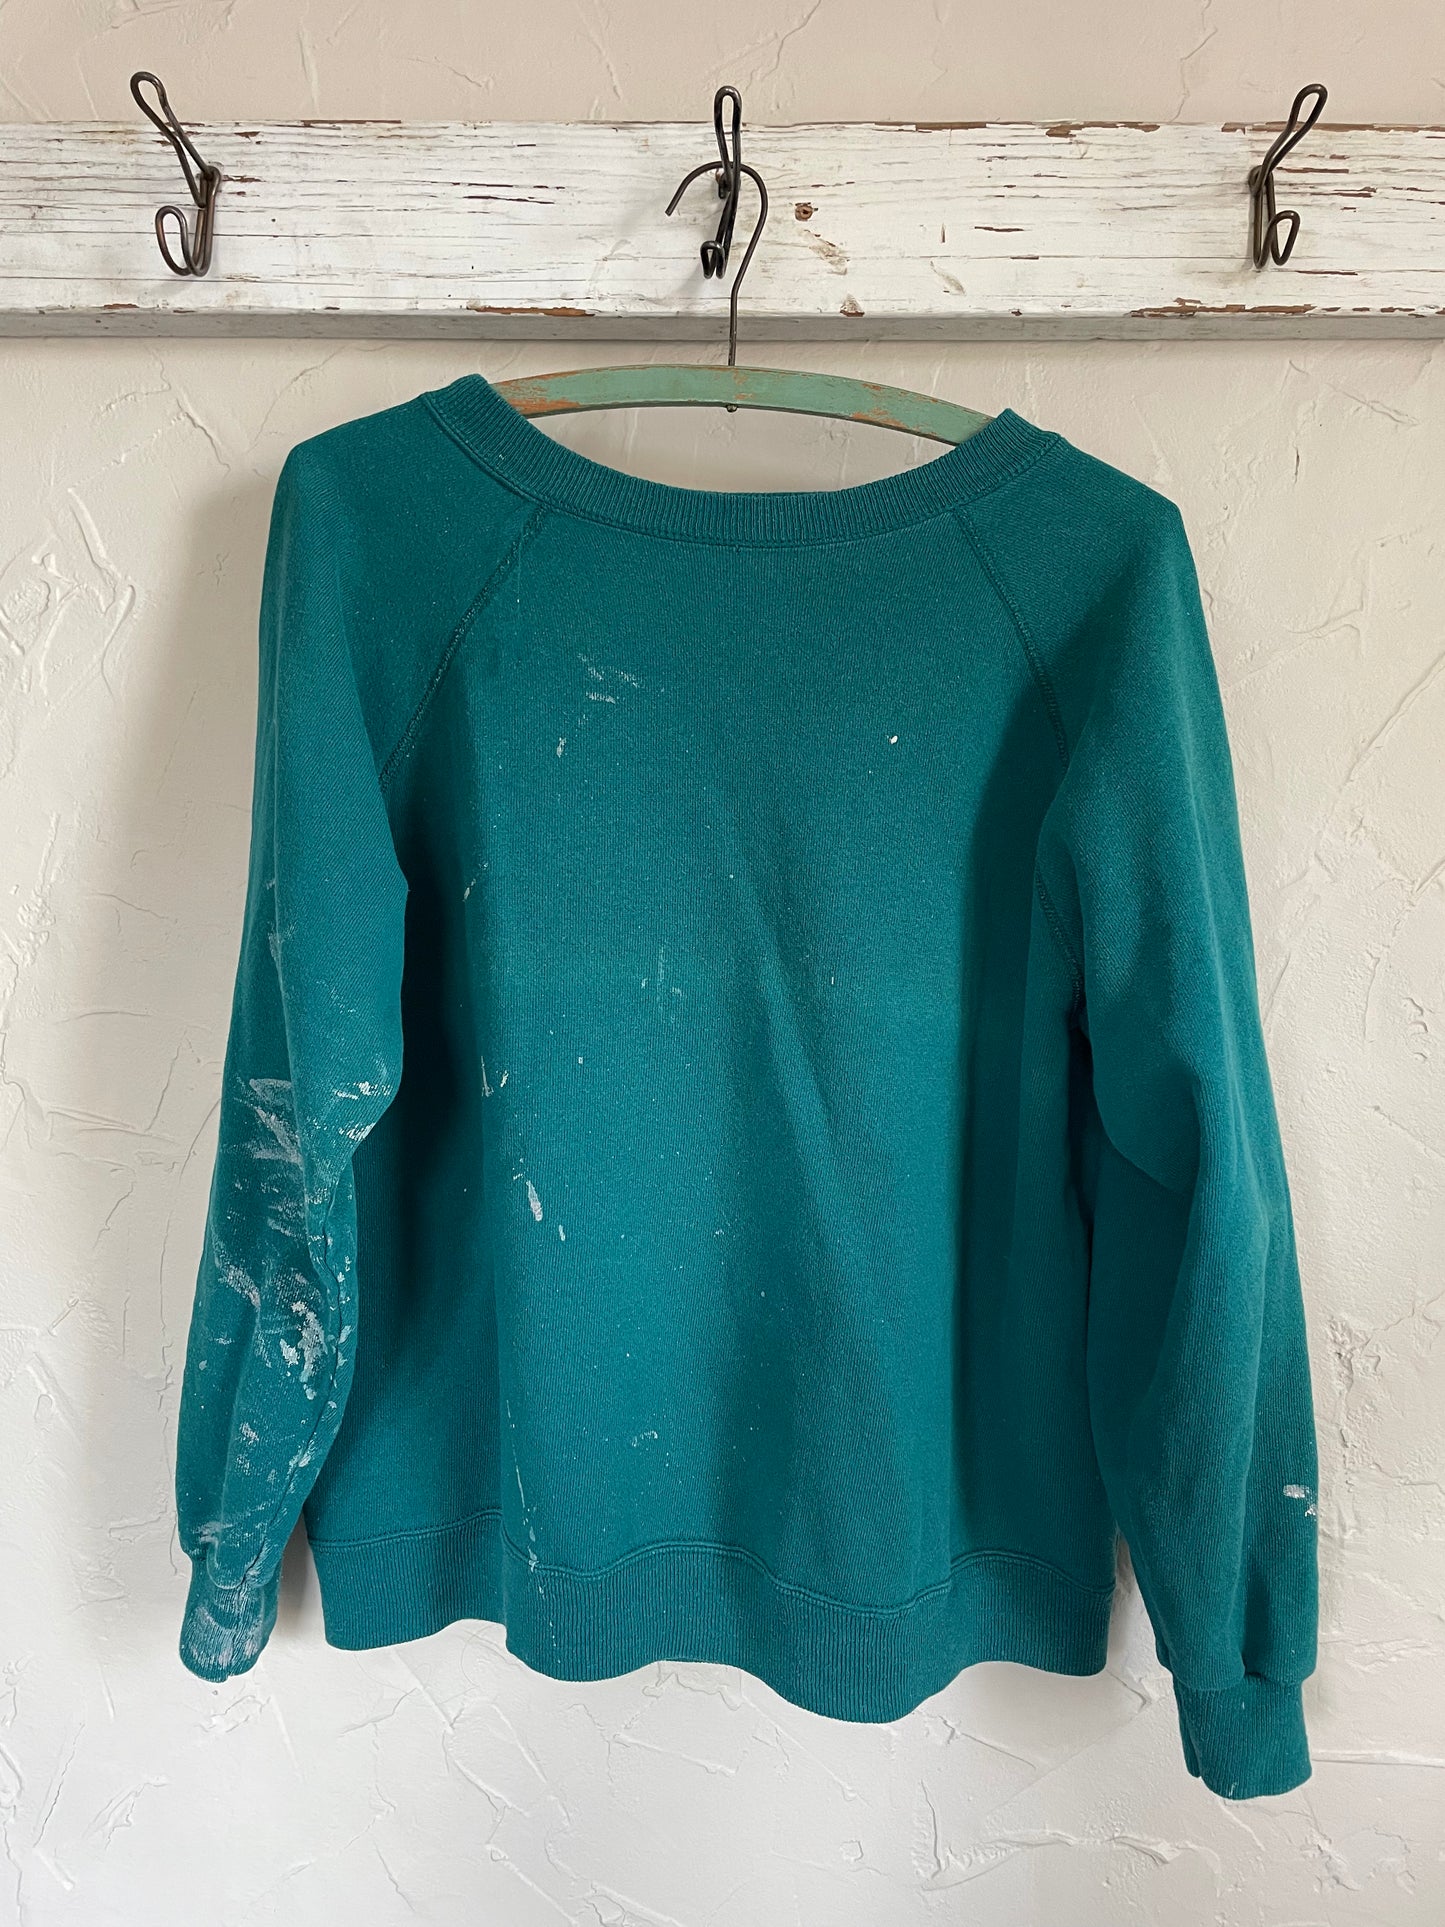 90s Teal Paint Stained Sweatshirt